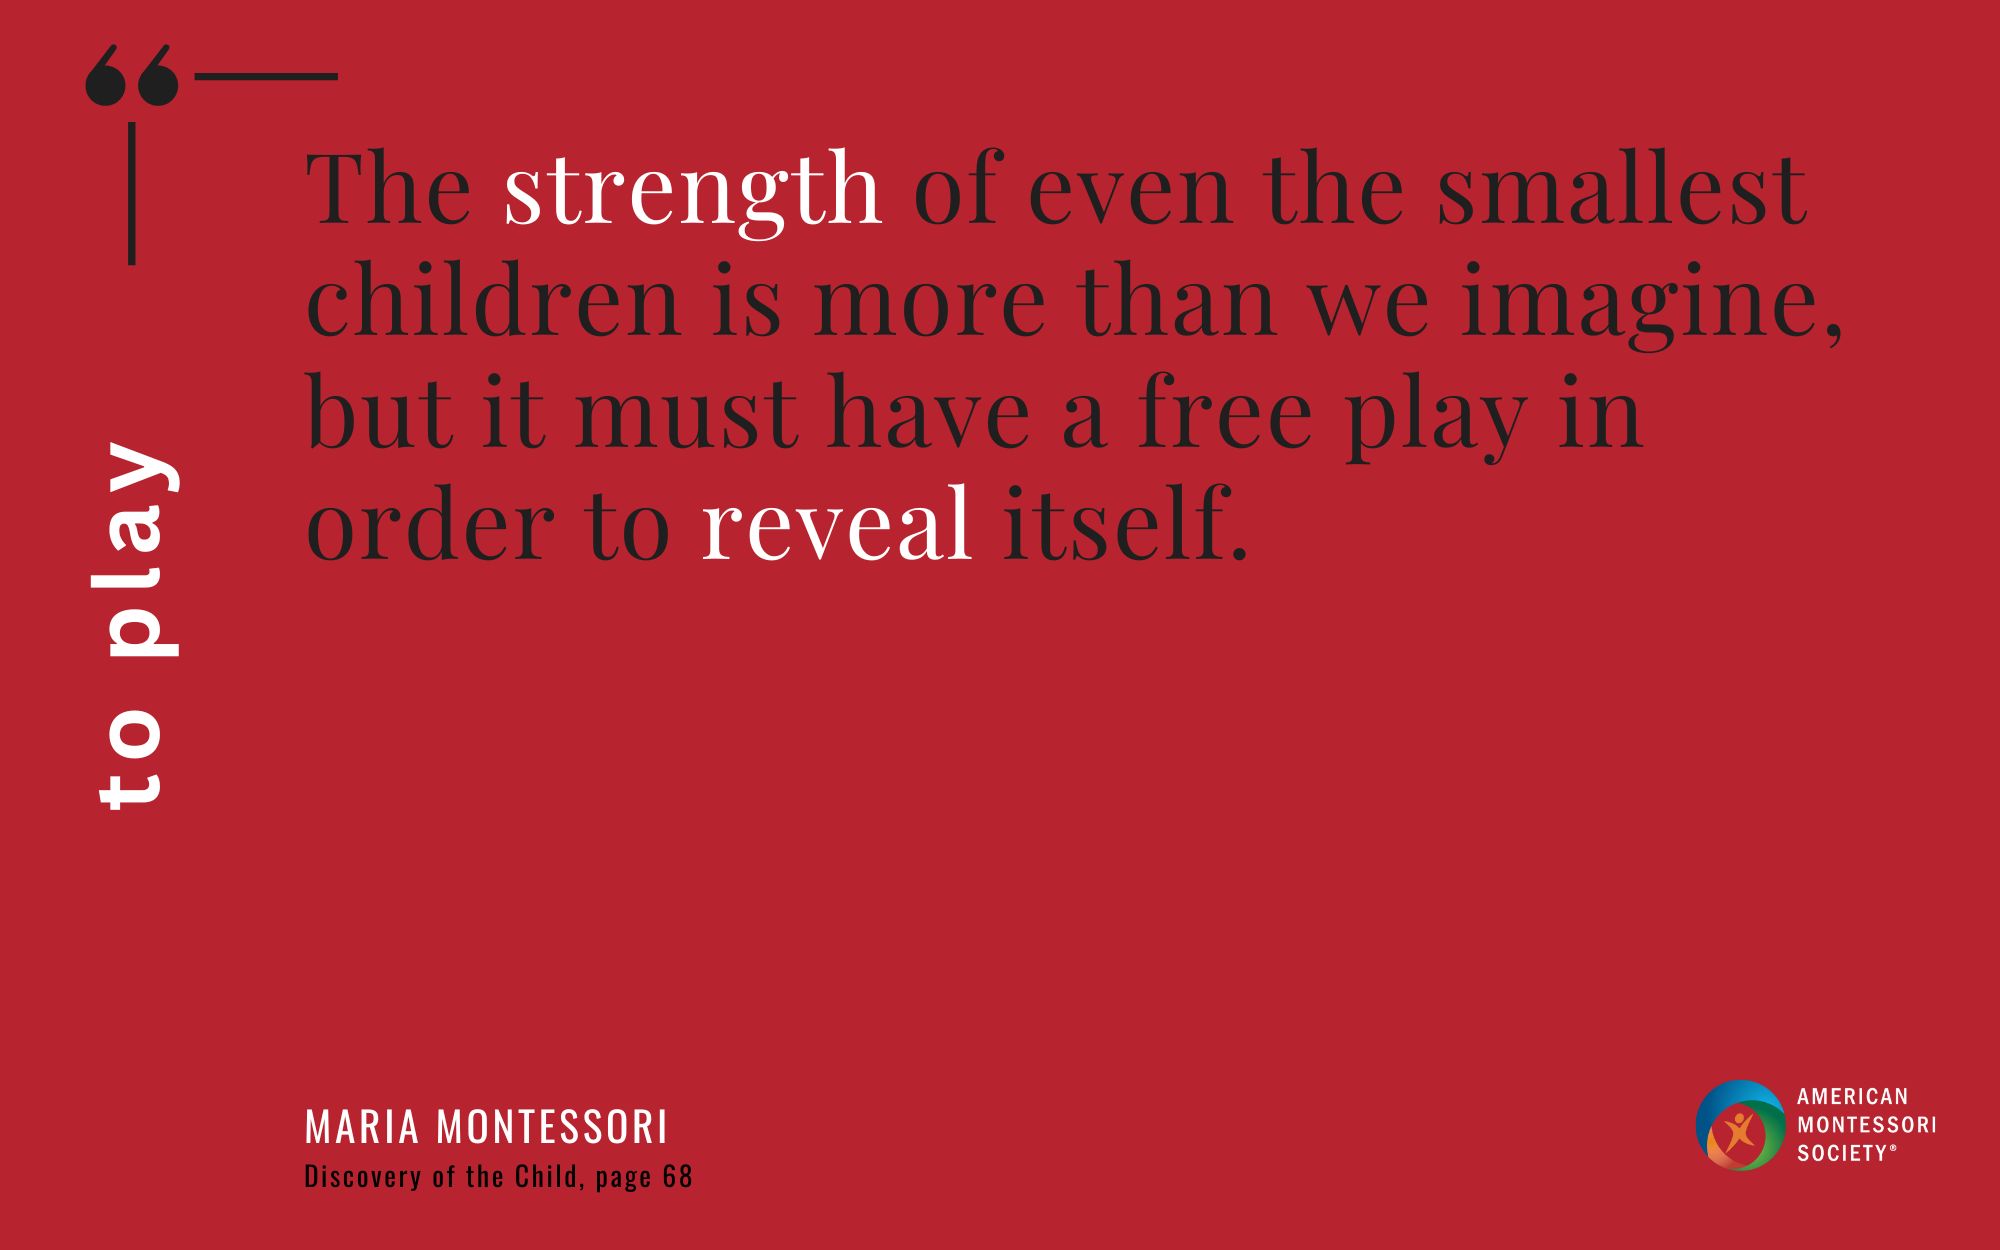 The strength of even the smallest children is more than we imagine, but it must have a free play in order to reveal itself.